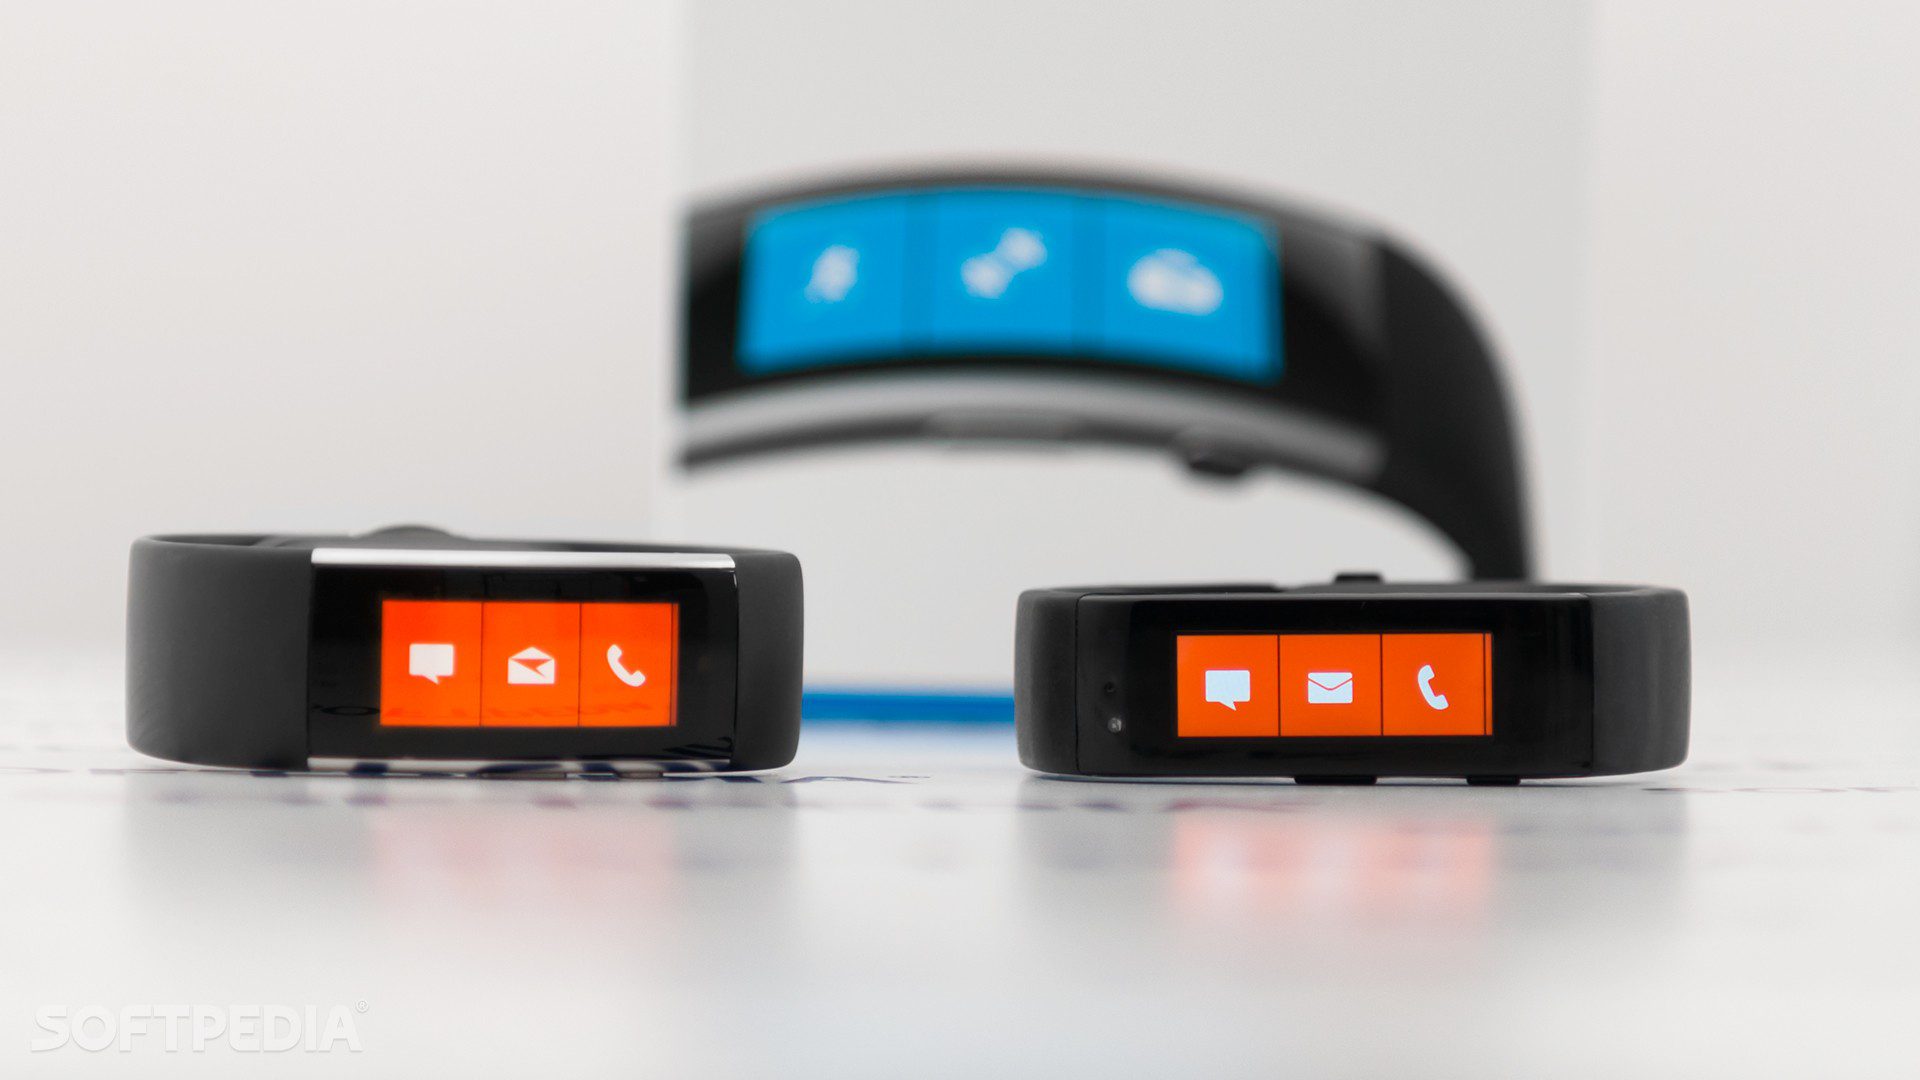 microsoft band 3 killed off for good windows 10 smartwatch still possible 509974 2